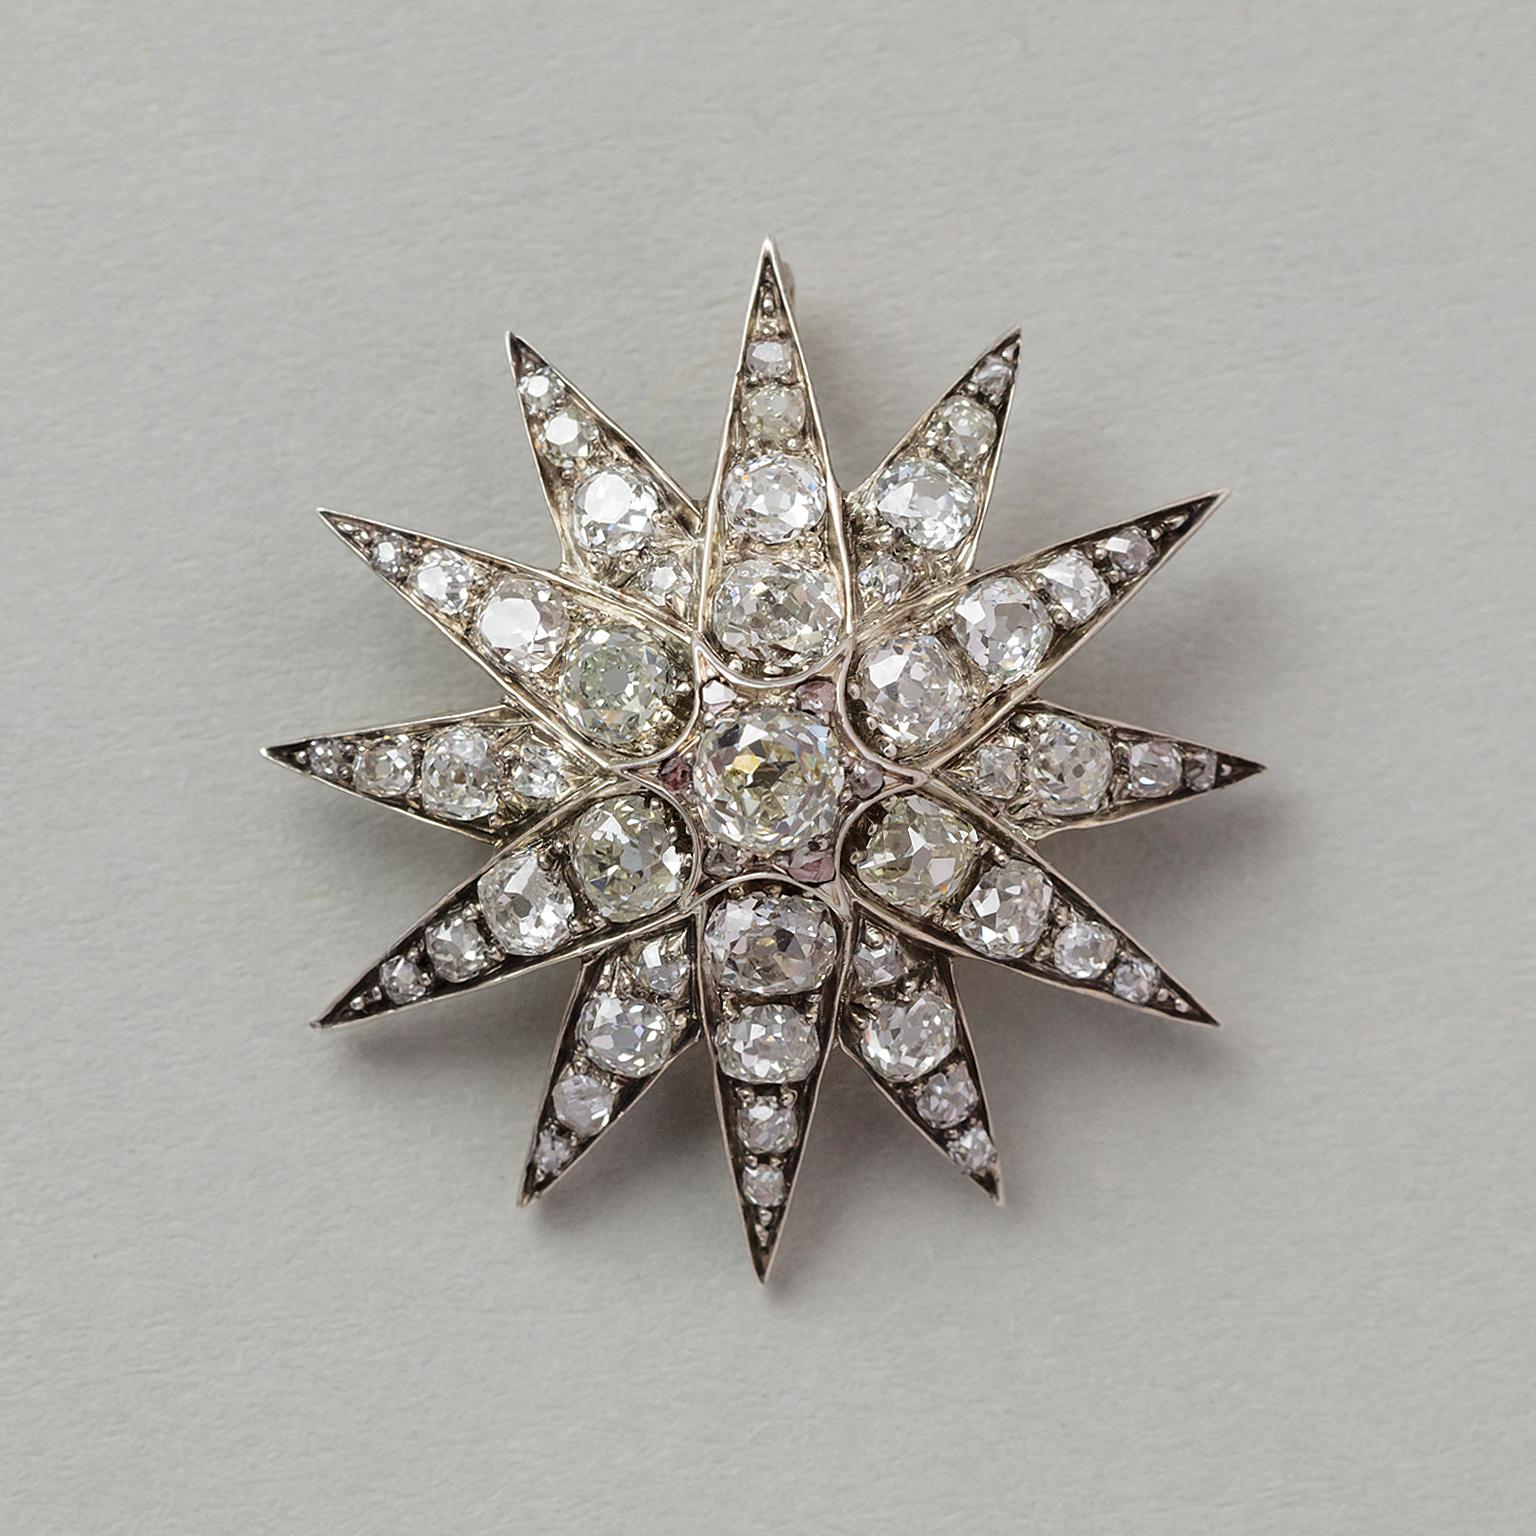 This lovely antique diamond star brooch circa 1890 is set with old cut diamonds (app. 4.5 carats) mounted in silver topped gold, and has a foldable bail so it can easily be transformed into a pendant or could once be screwed onto a tiara. Last but